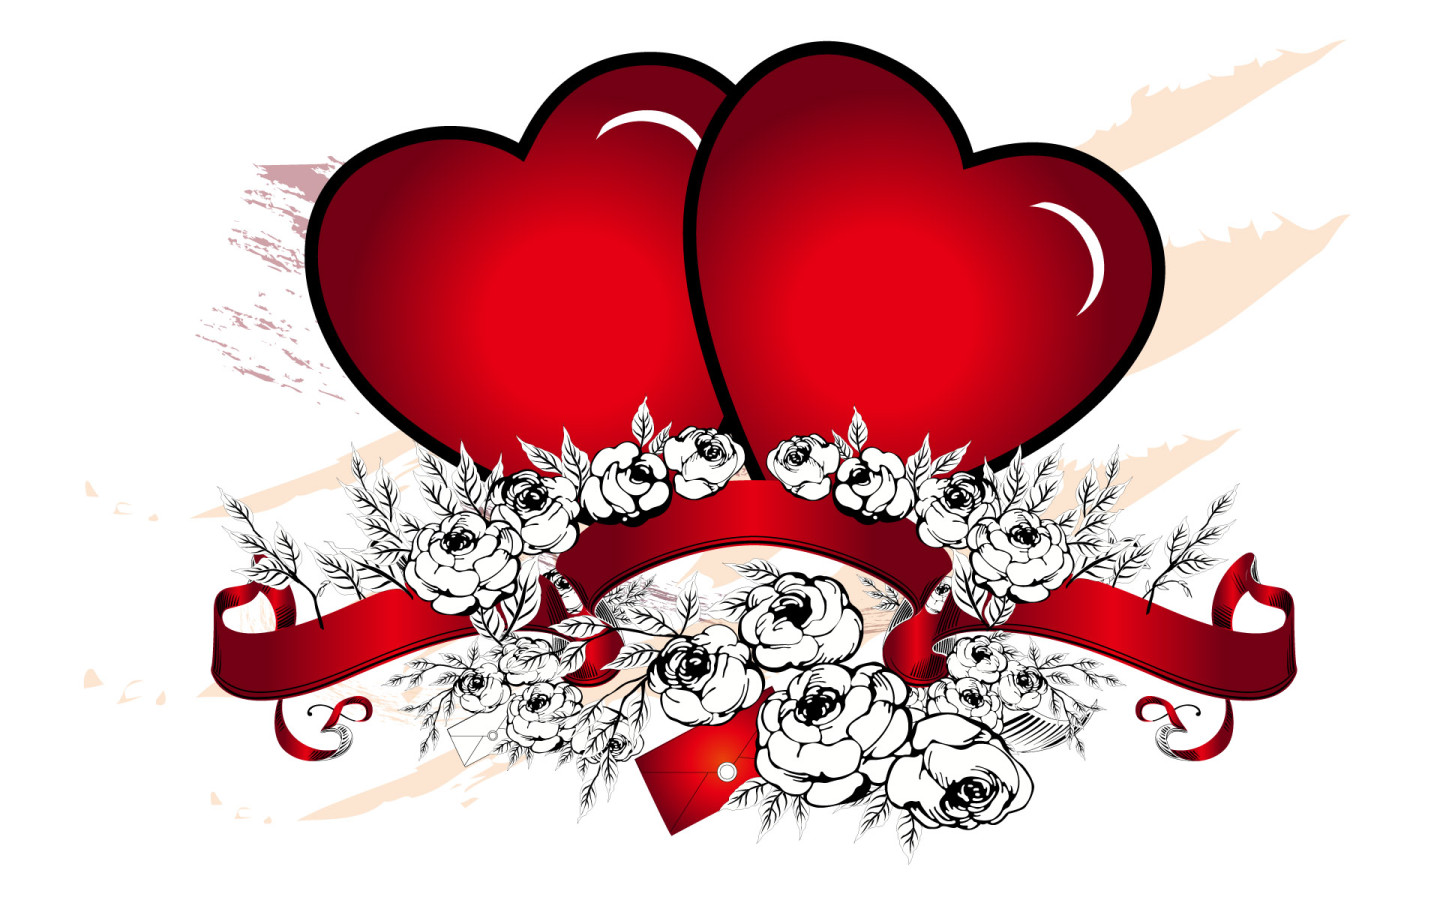 40 Beautiful Valentines Day Wallpapers For Desktop - My Everything Happy Valentine - HD Wallpaper 